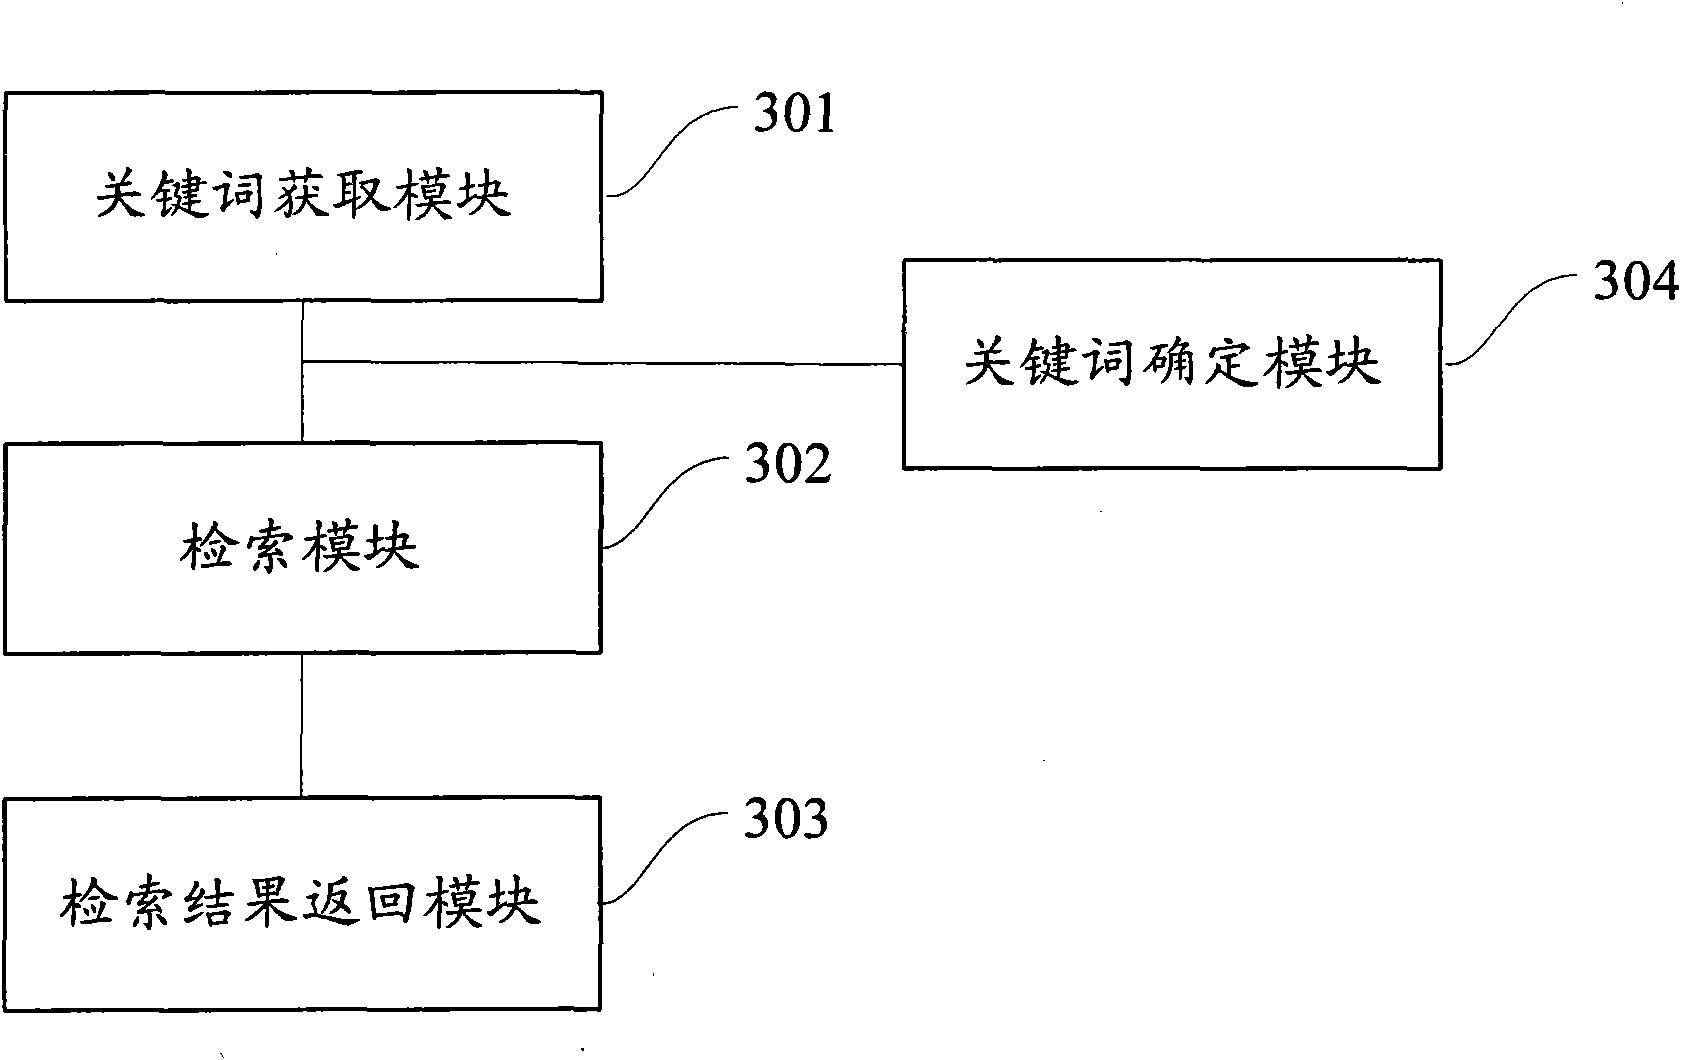 Method and system for retrieving medical information